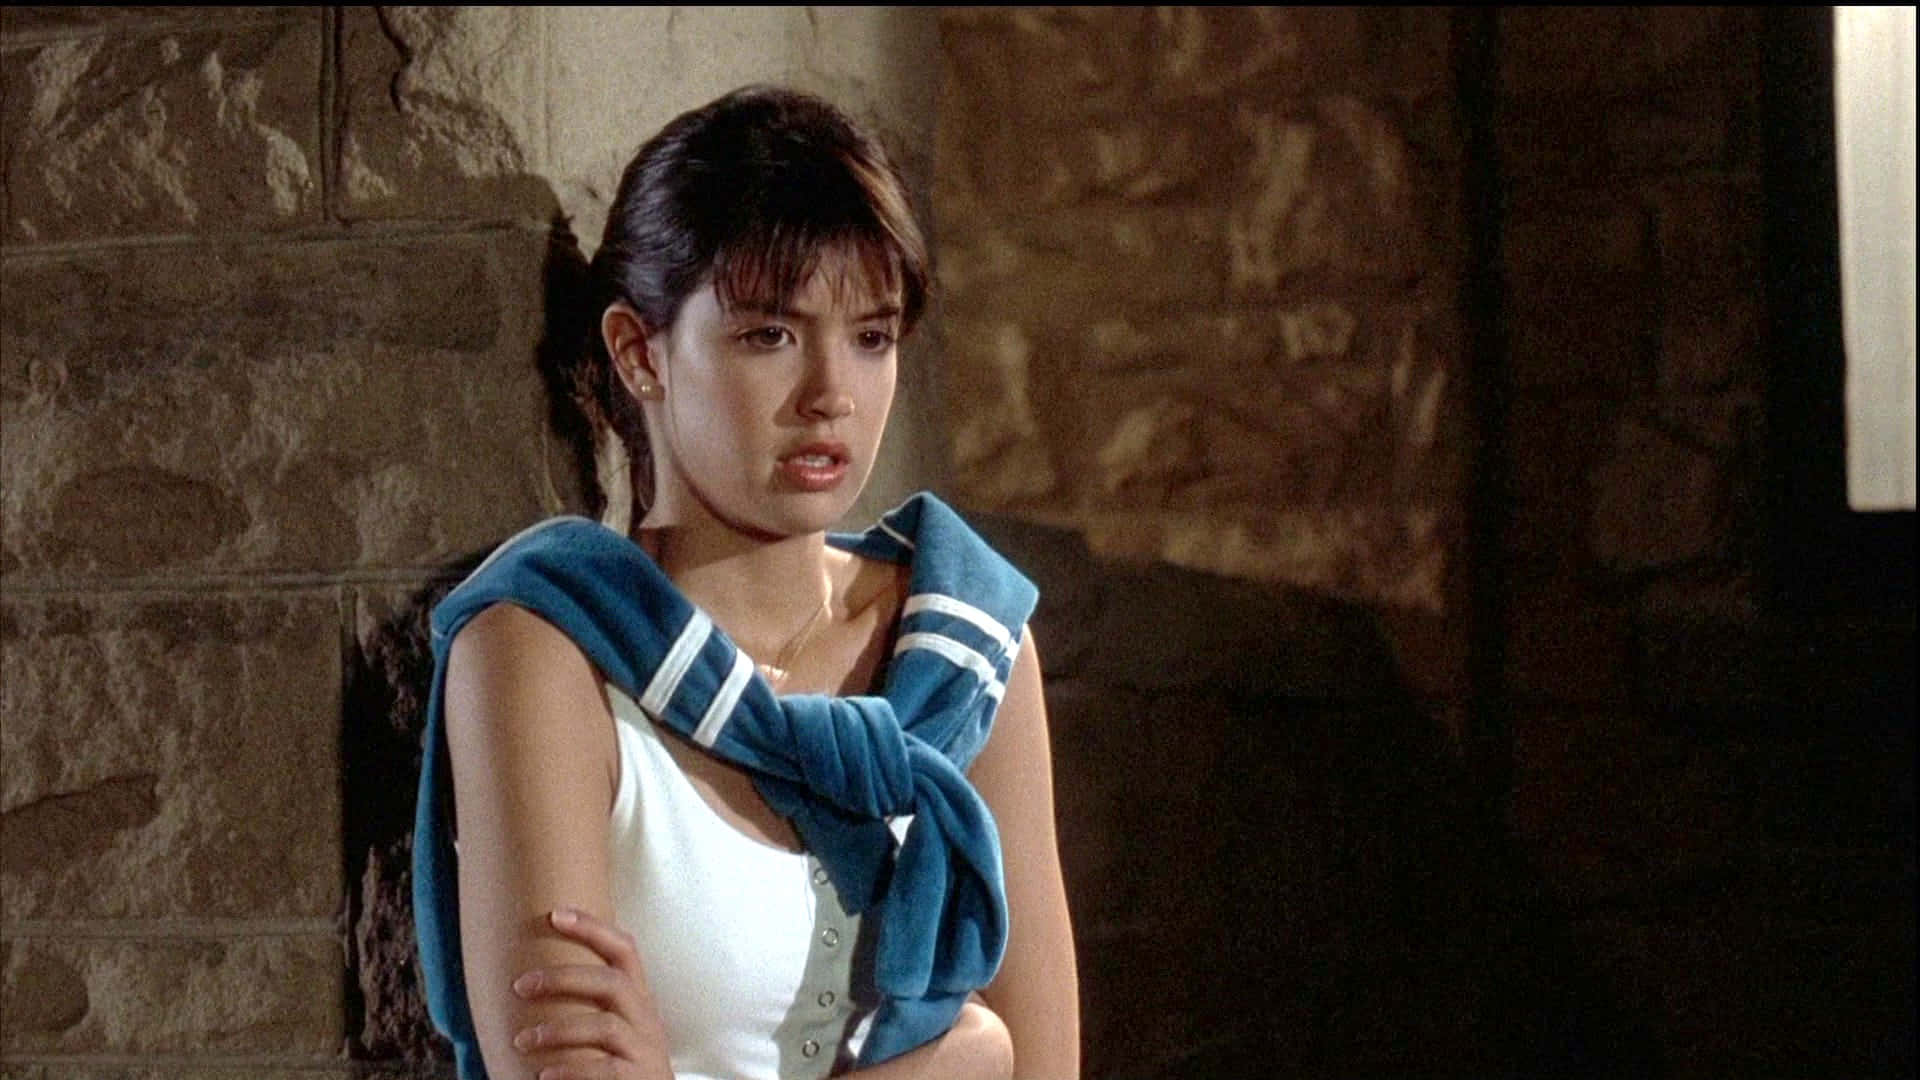 Phoebe Cates looking stunning in her photo shoot Wallpaper